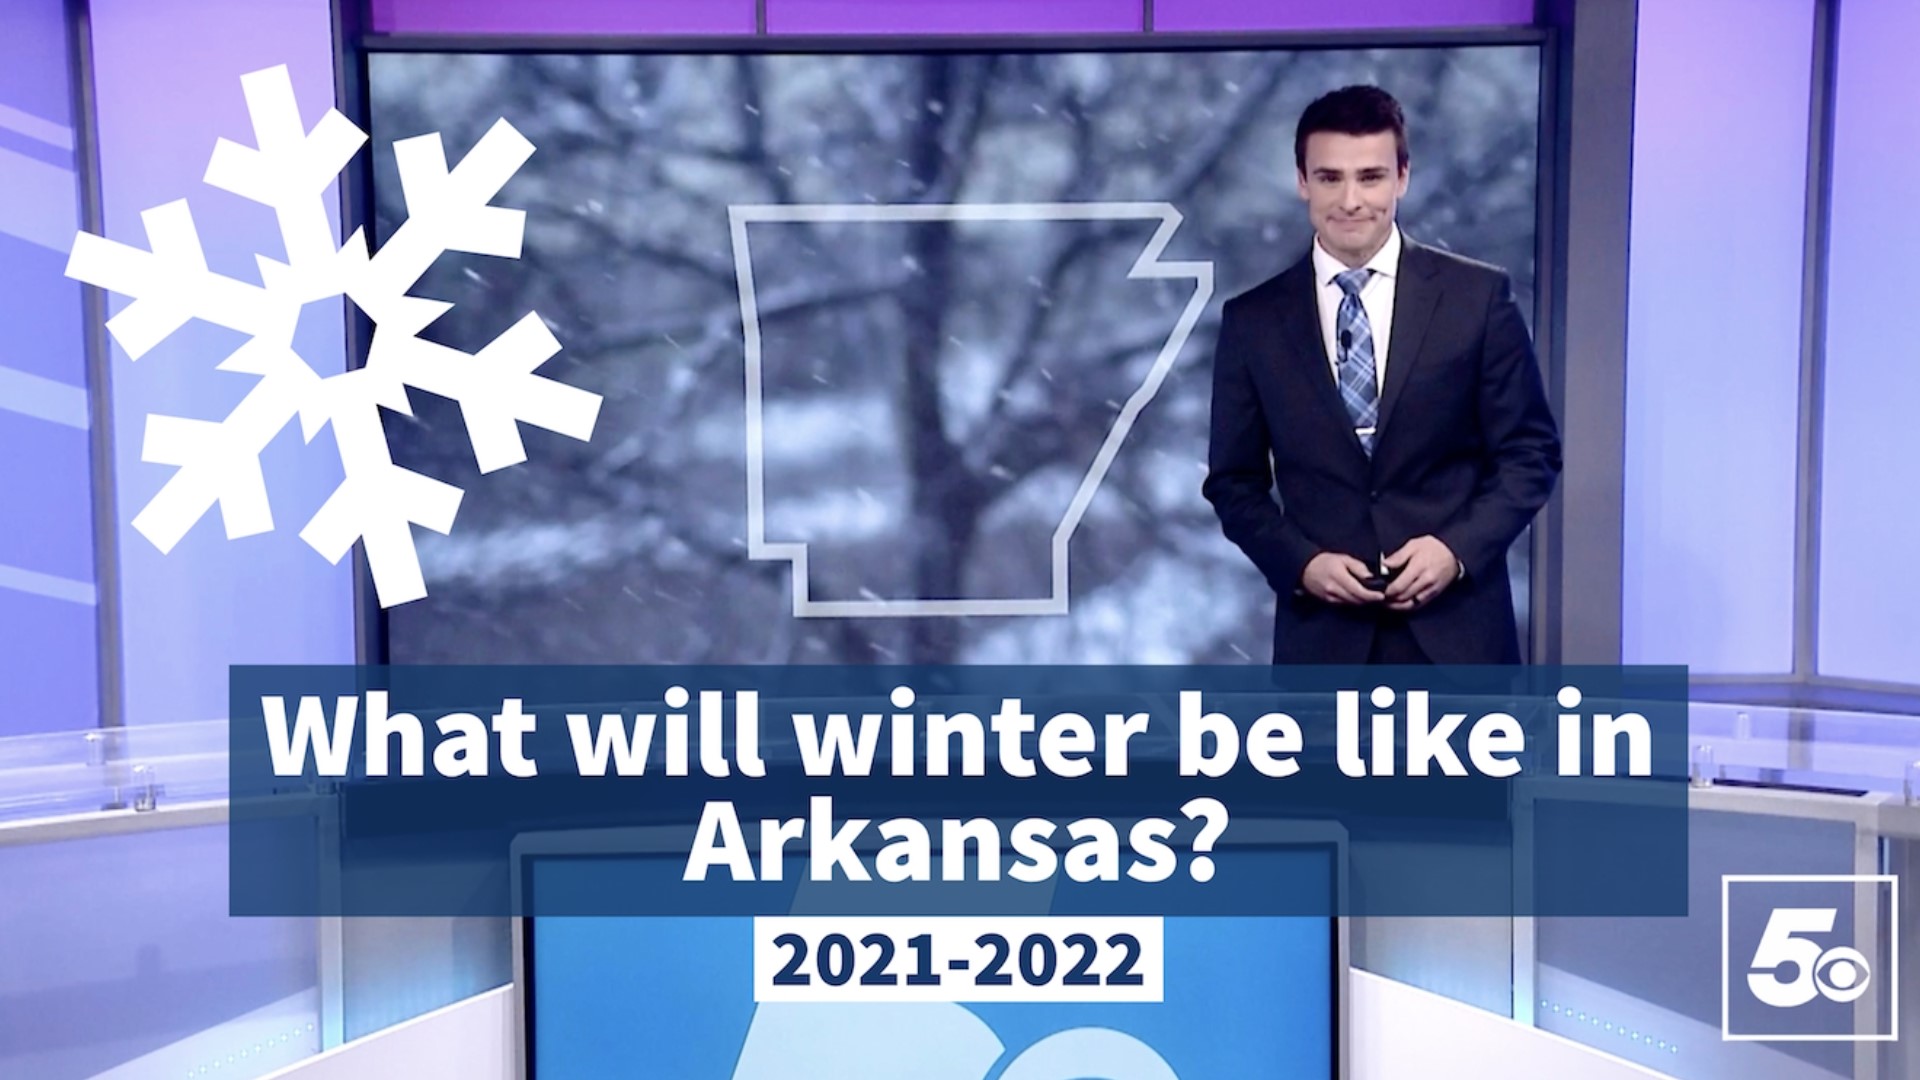 Will this winter have more or less snow? Will it be colder or warmer? Ice storms? Tornadoes? Here is the 5NEWS Winter Weather Outlook -- Arctic Arkansas.